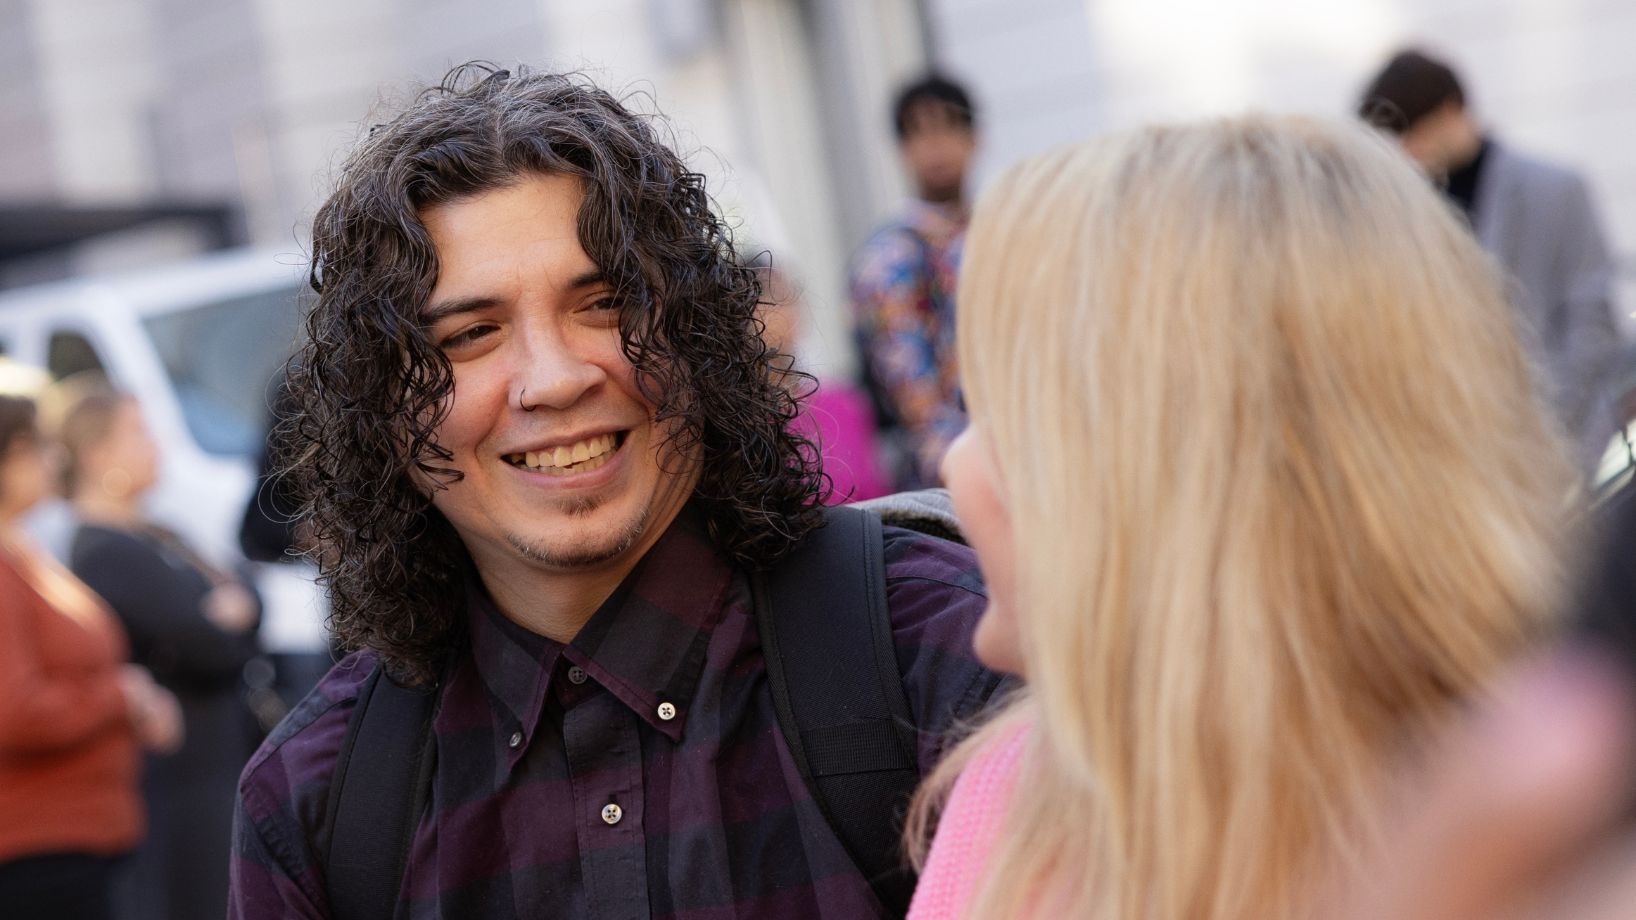 a man with long black curly hair smiling at someone with long blond wavy hair